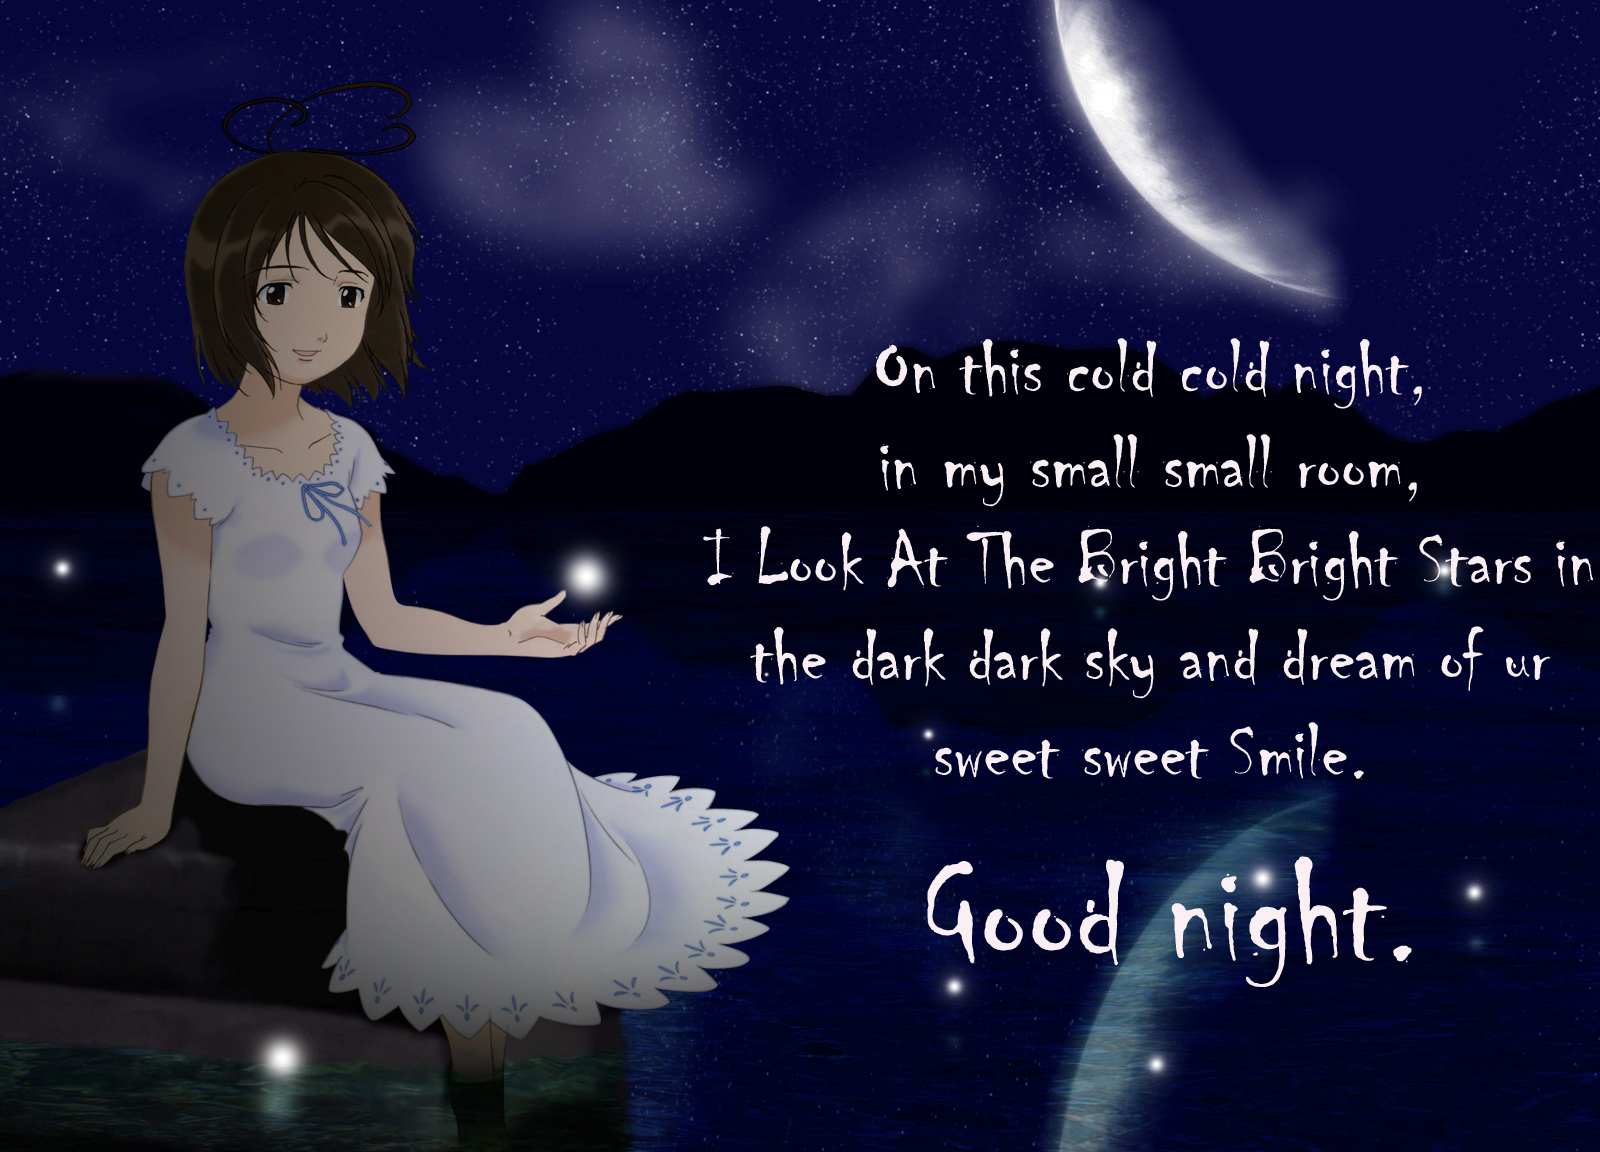 Free download Cute Good Night Wallpapers Images amp Pictures Becuo ...